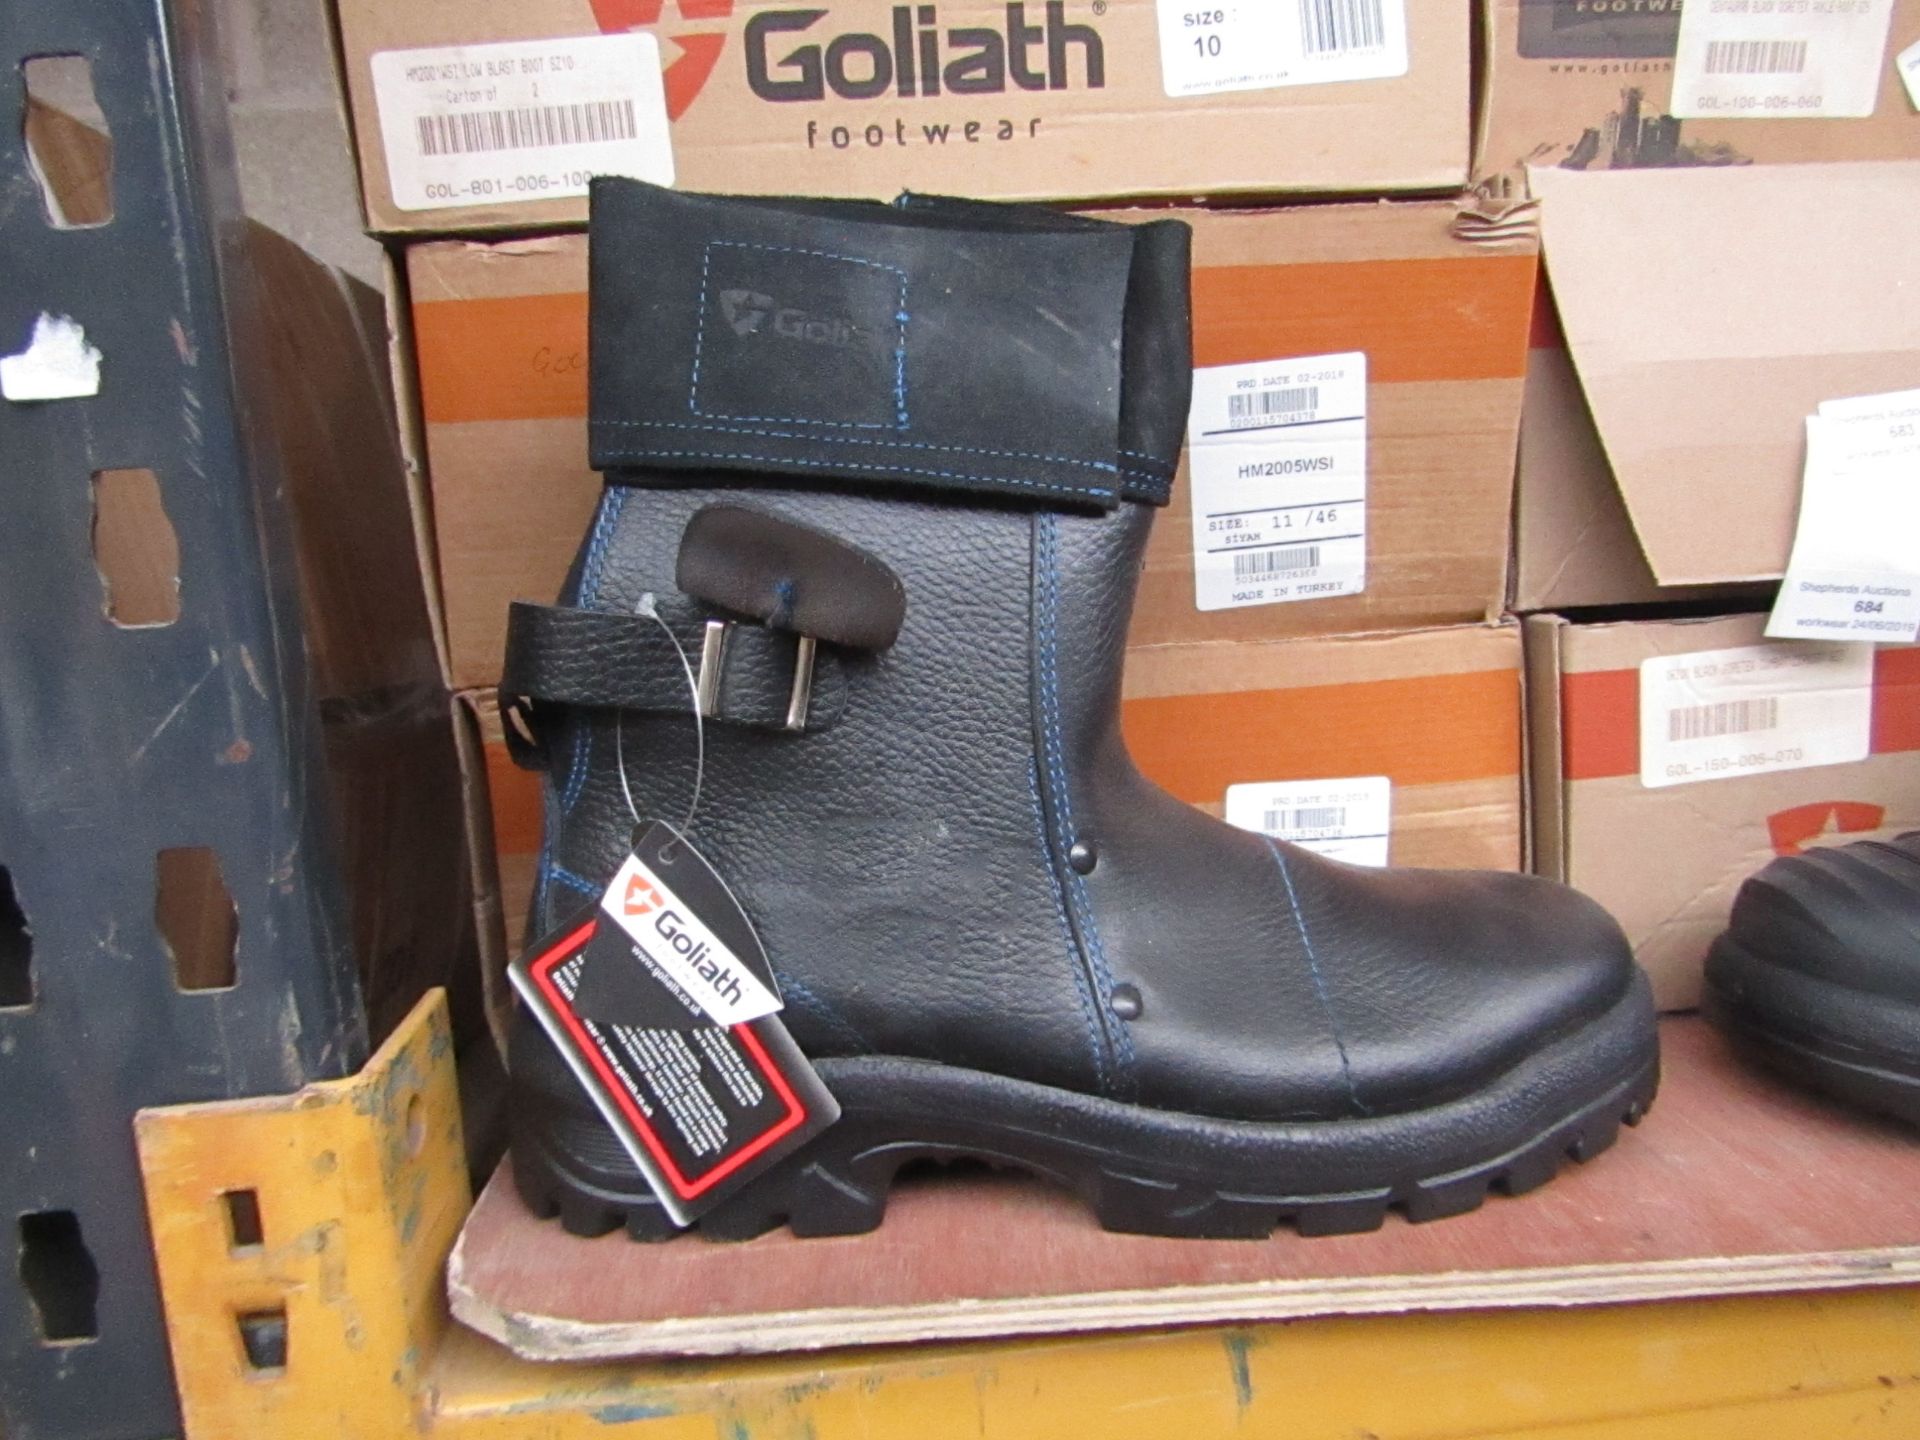 Goliath ankle boot with steel midsole, size 8, new and boxed. RRP £57.49